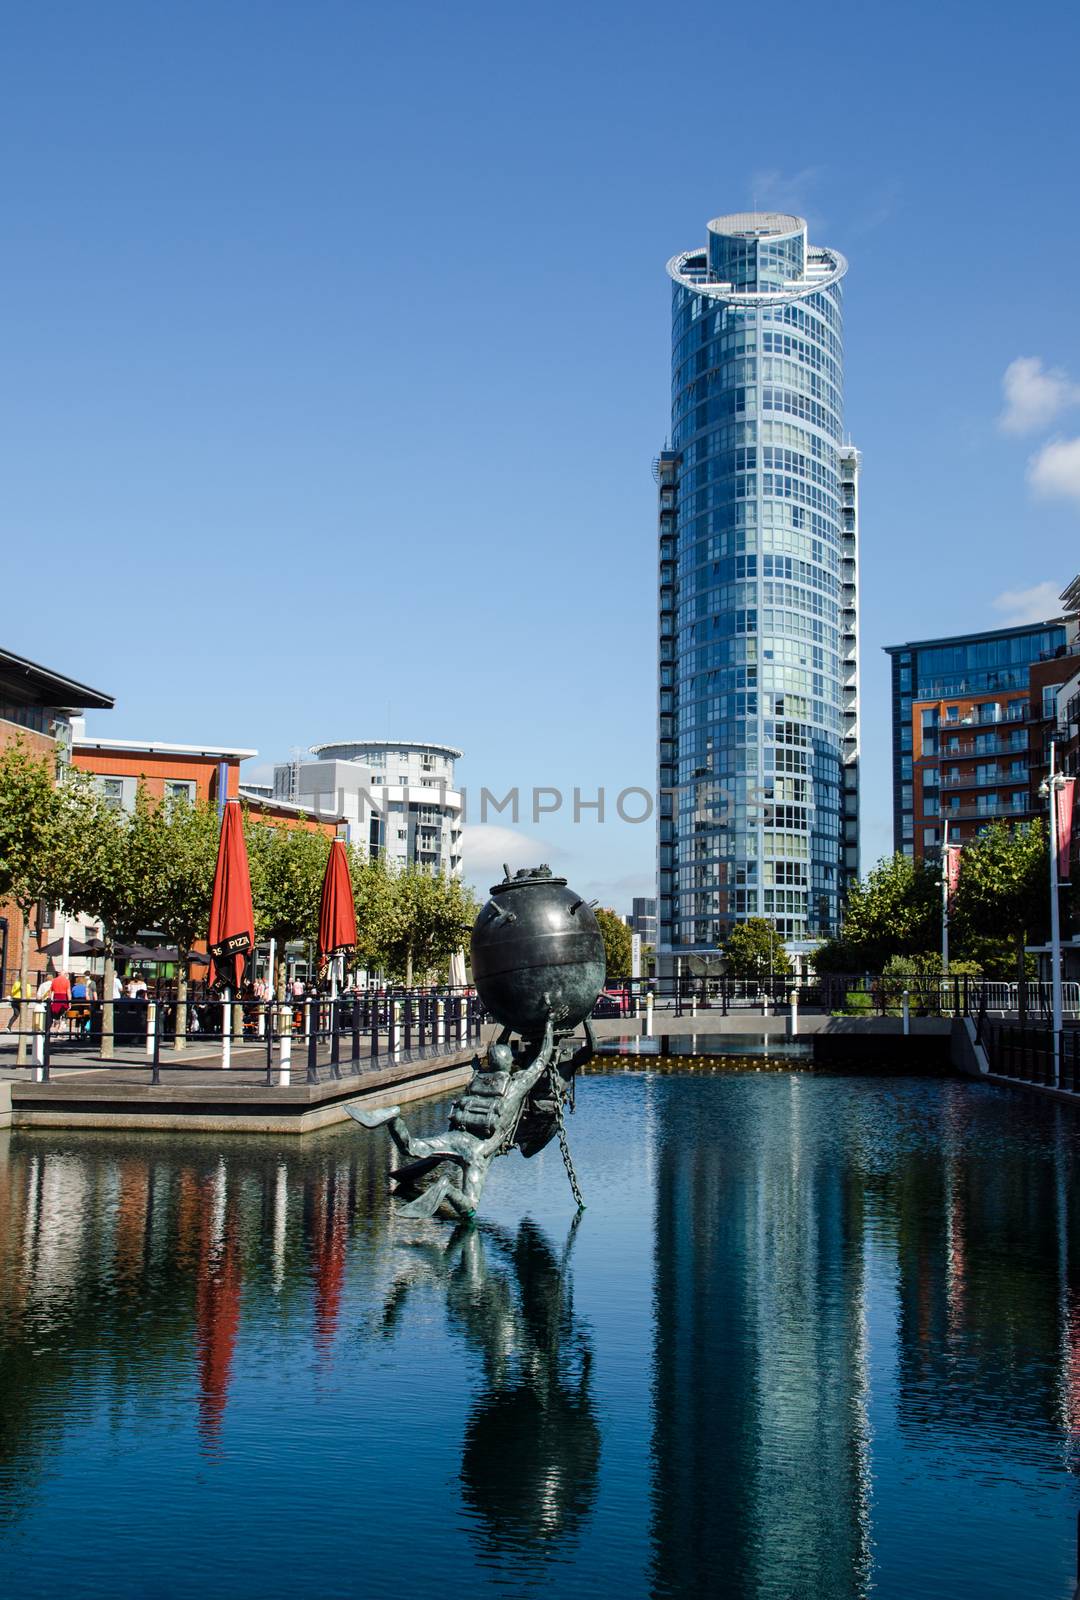 View along a converted dock looking towards the Number 1 Gunwharf Quays apartment block in Portsmouth, Hampshire.  The Vernon Monument to Royal Navy divers and bomb disposal experts is in the foreground.  Sunny Summer day.